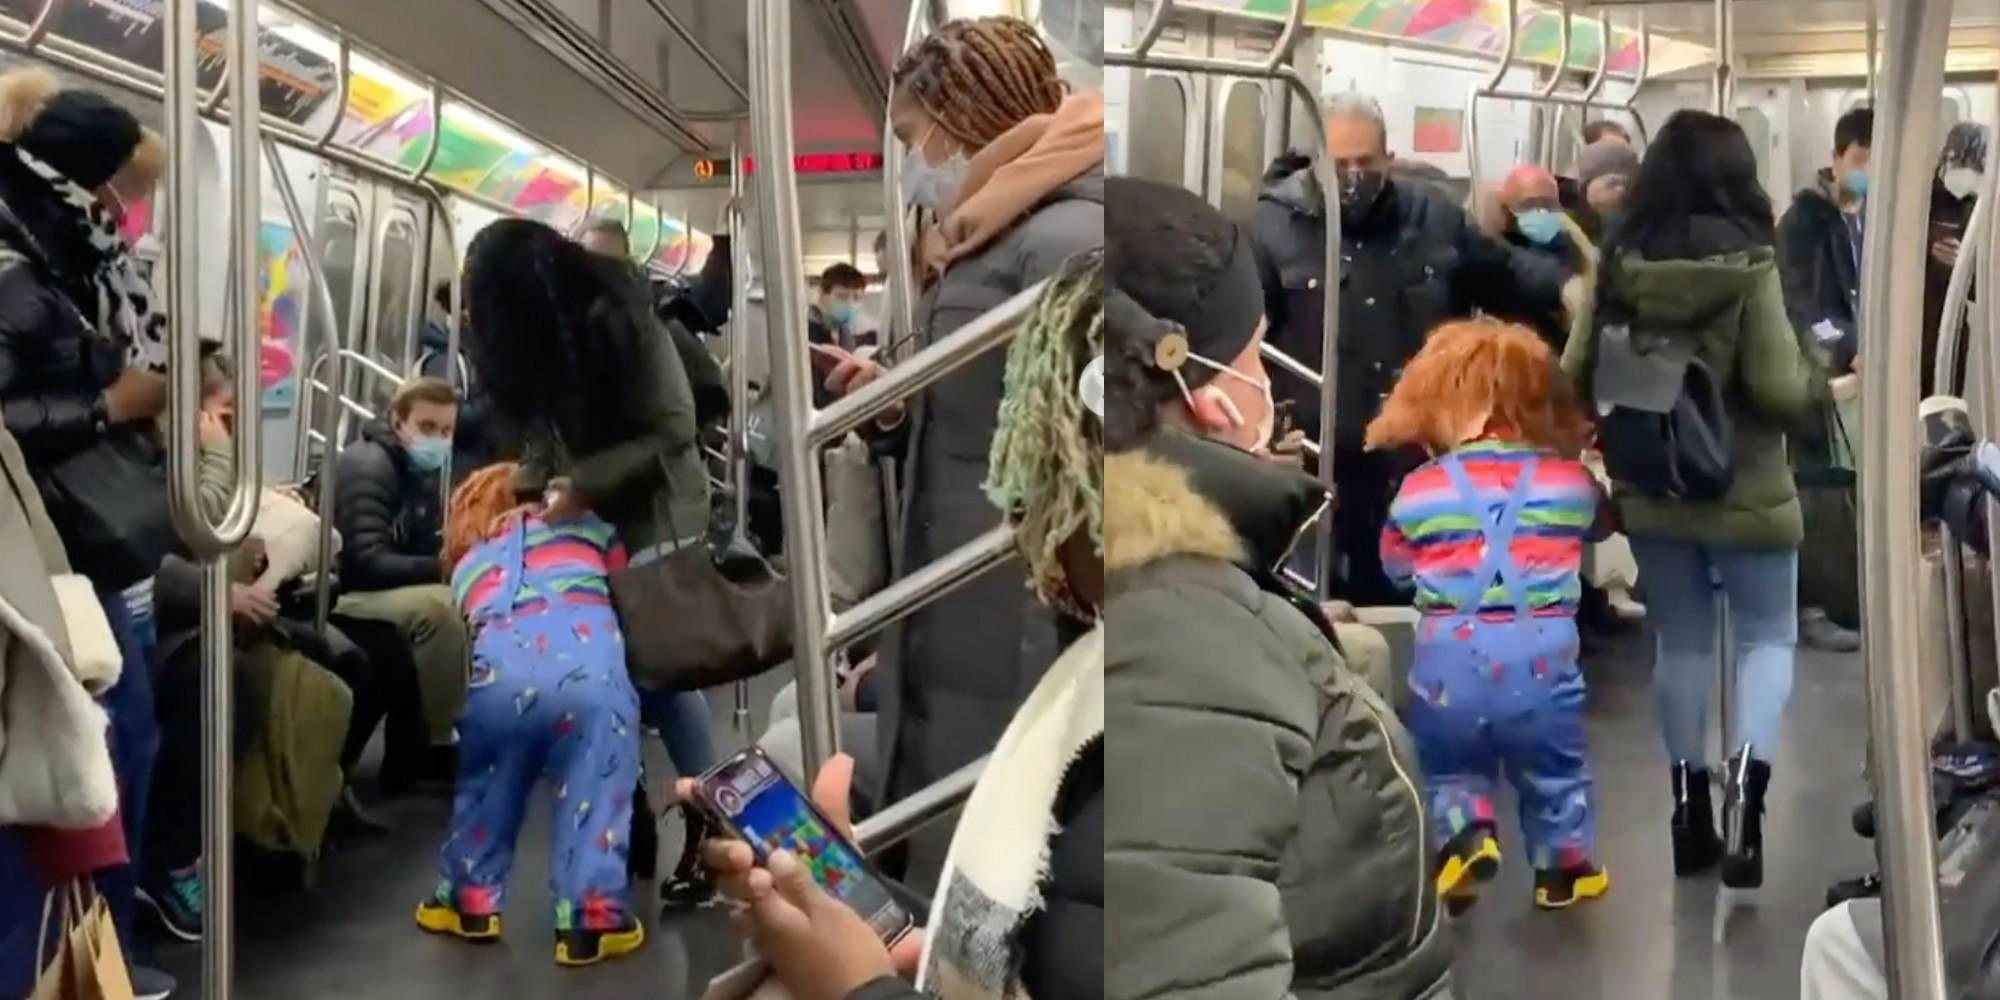 Video shows 'Chucky' attacking a mask-less woman on NYC subway